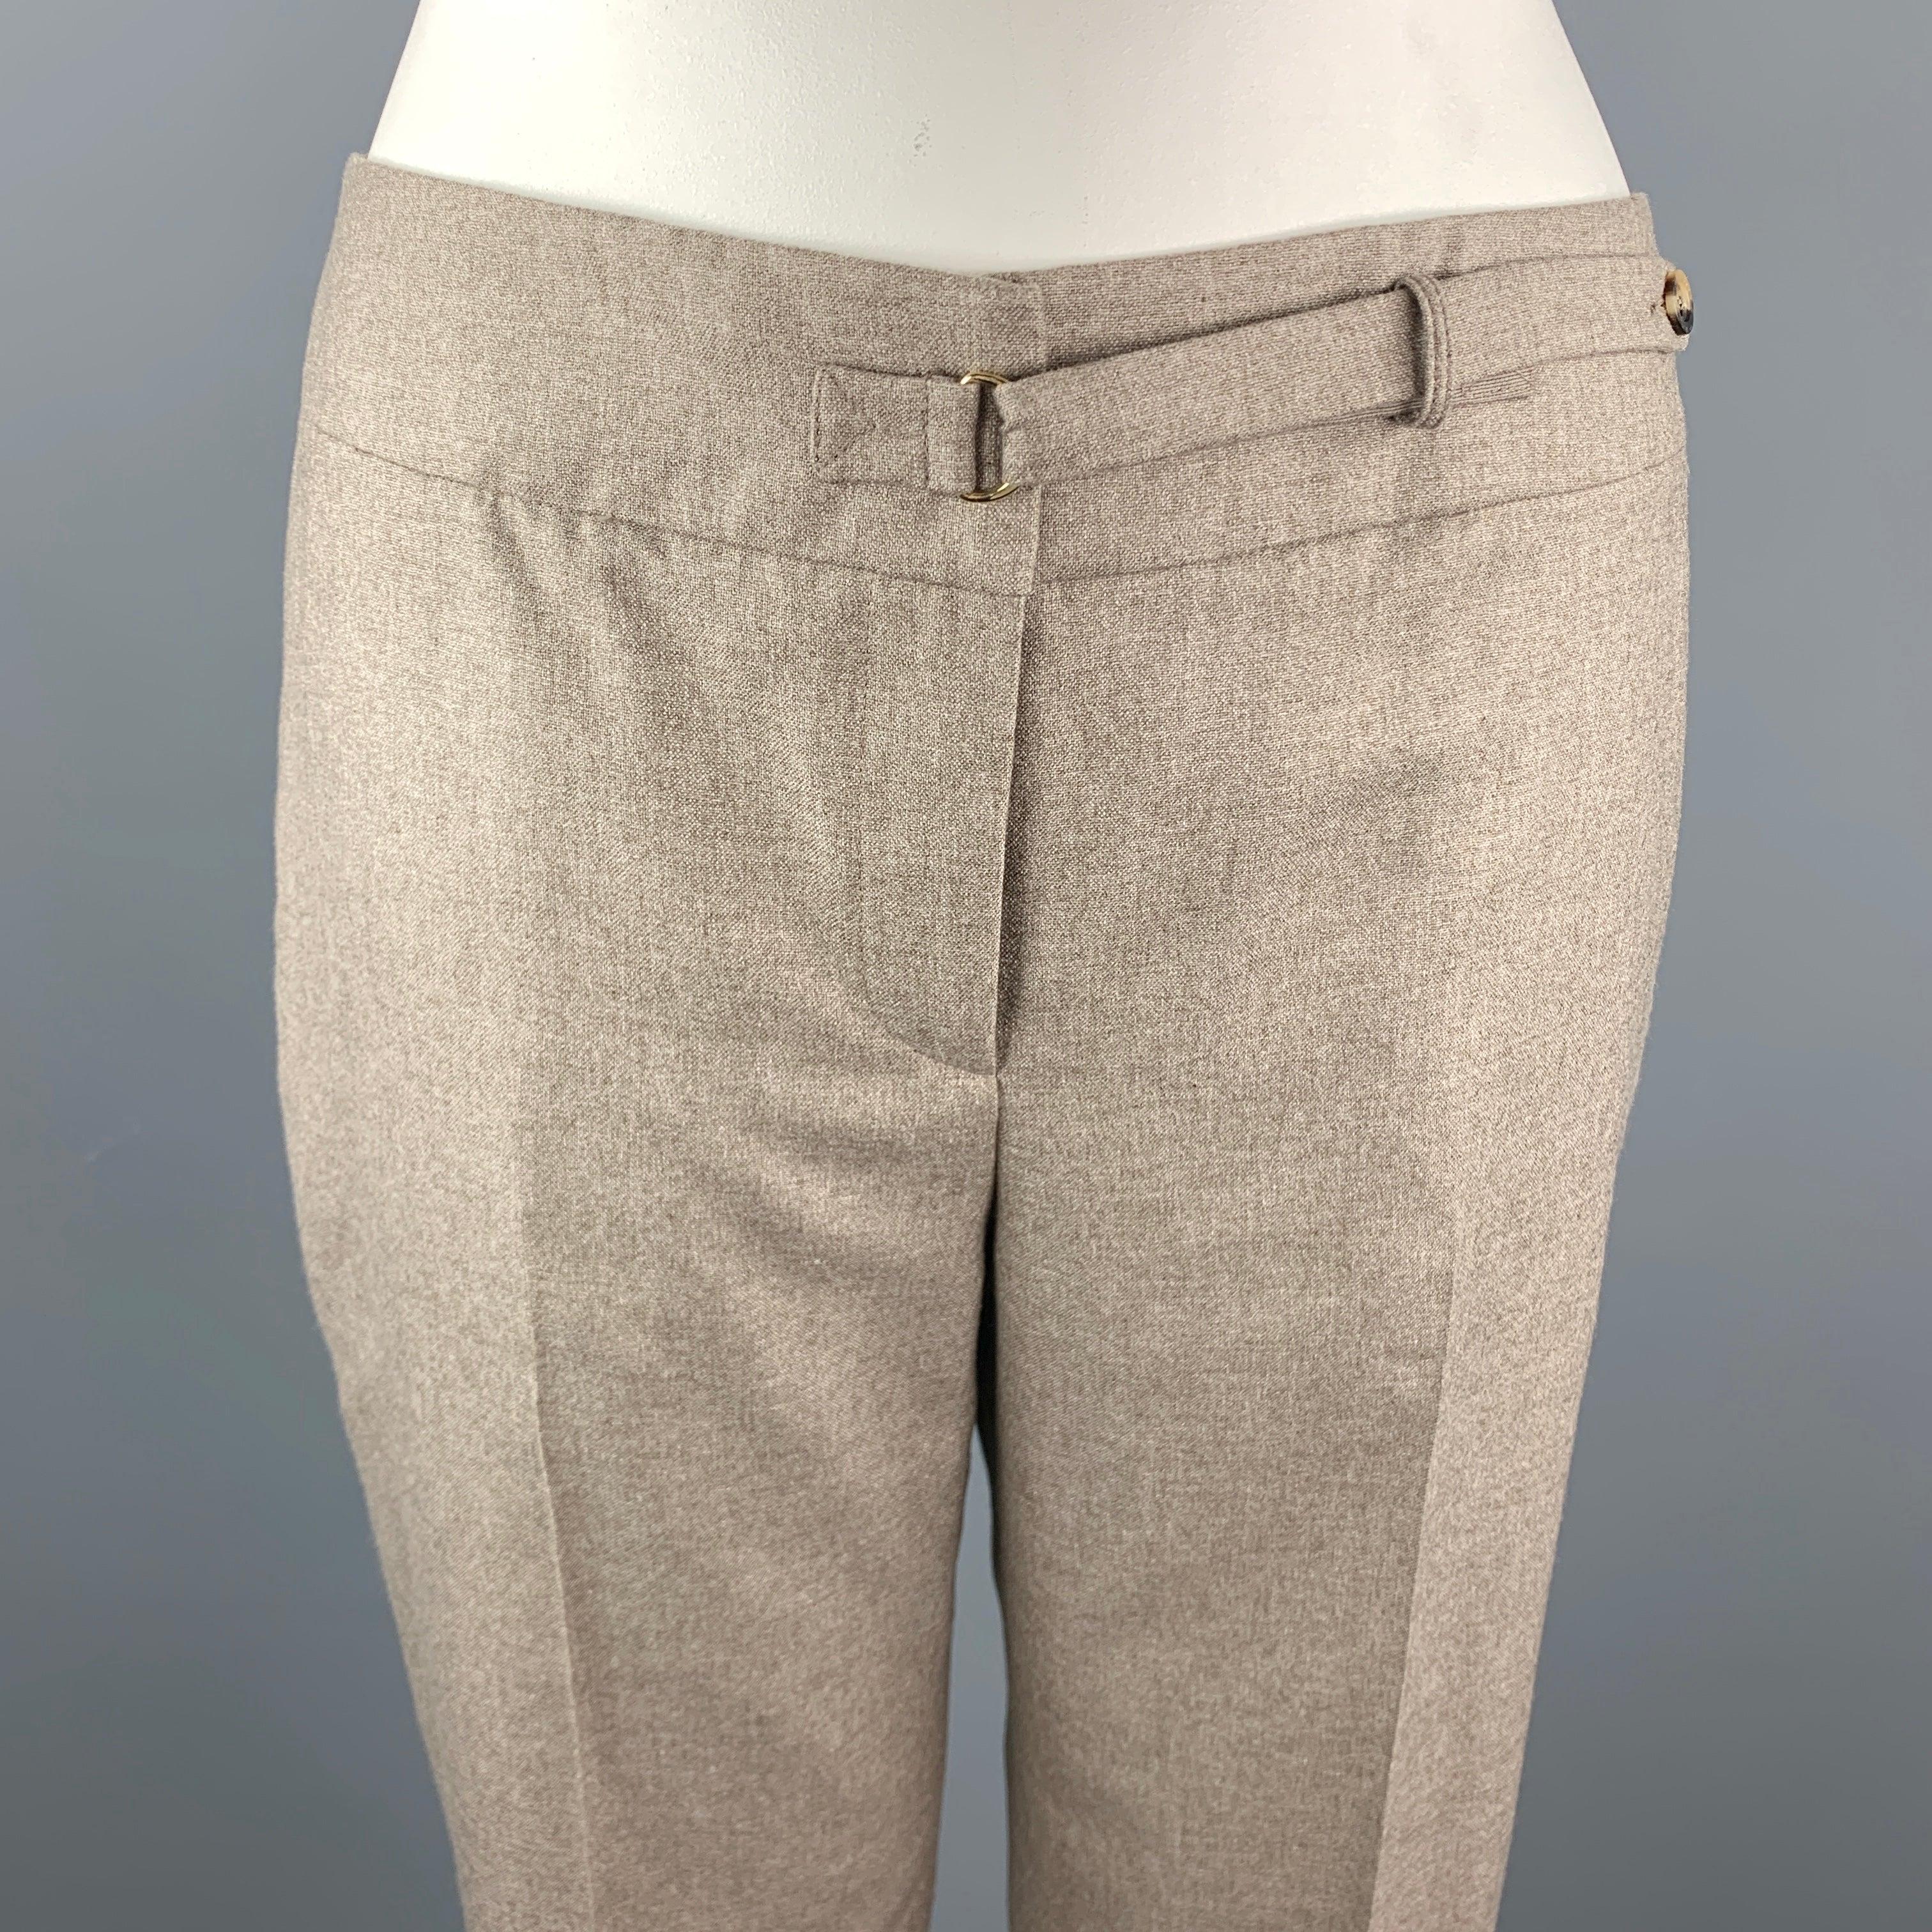 GIORGIO ARMANI Dress Pants
comes in a taupe heather silk / cashmere material, with a flat front, a front tab, seam pockets, and straight legs. Made in Italy.
Excellent Pre-Owned Condition. 

Marked:   IT 52 

Measurements: 
  Waist: 35 inches 
Rise: